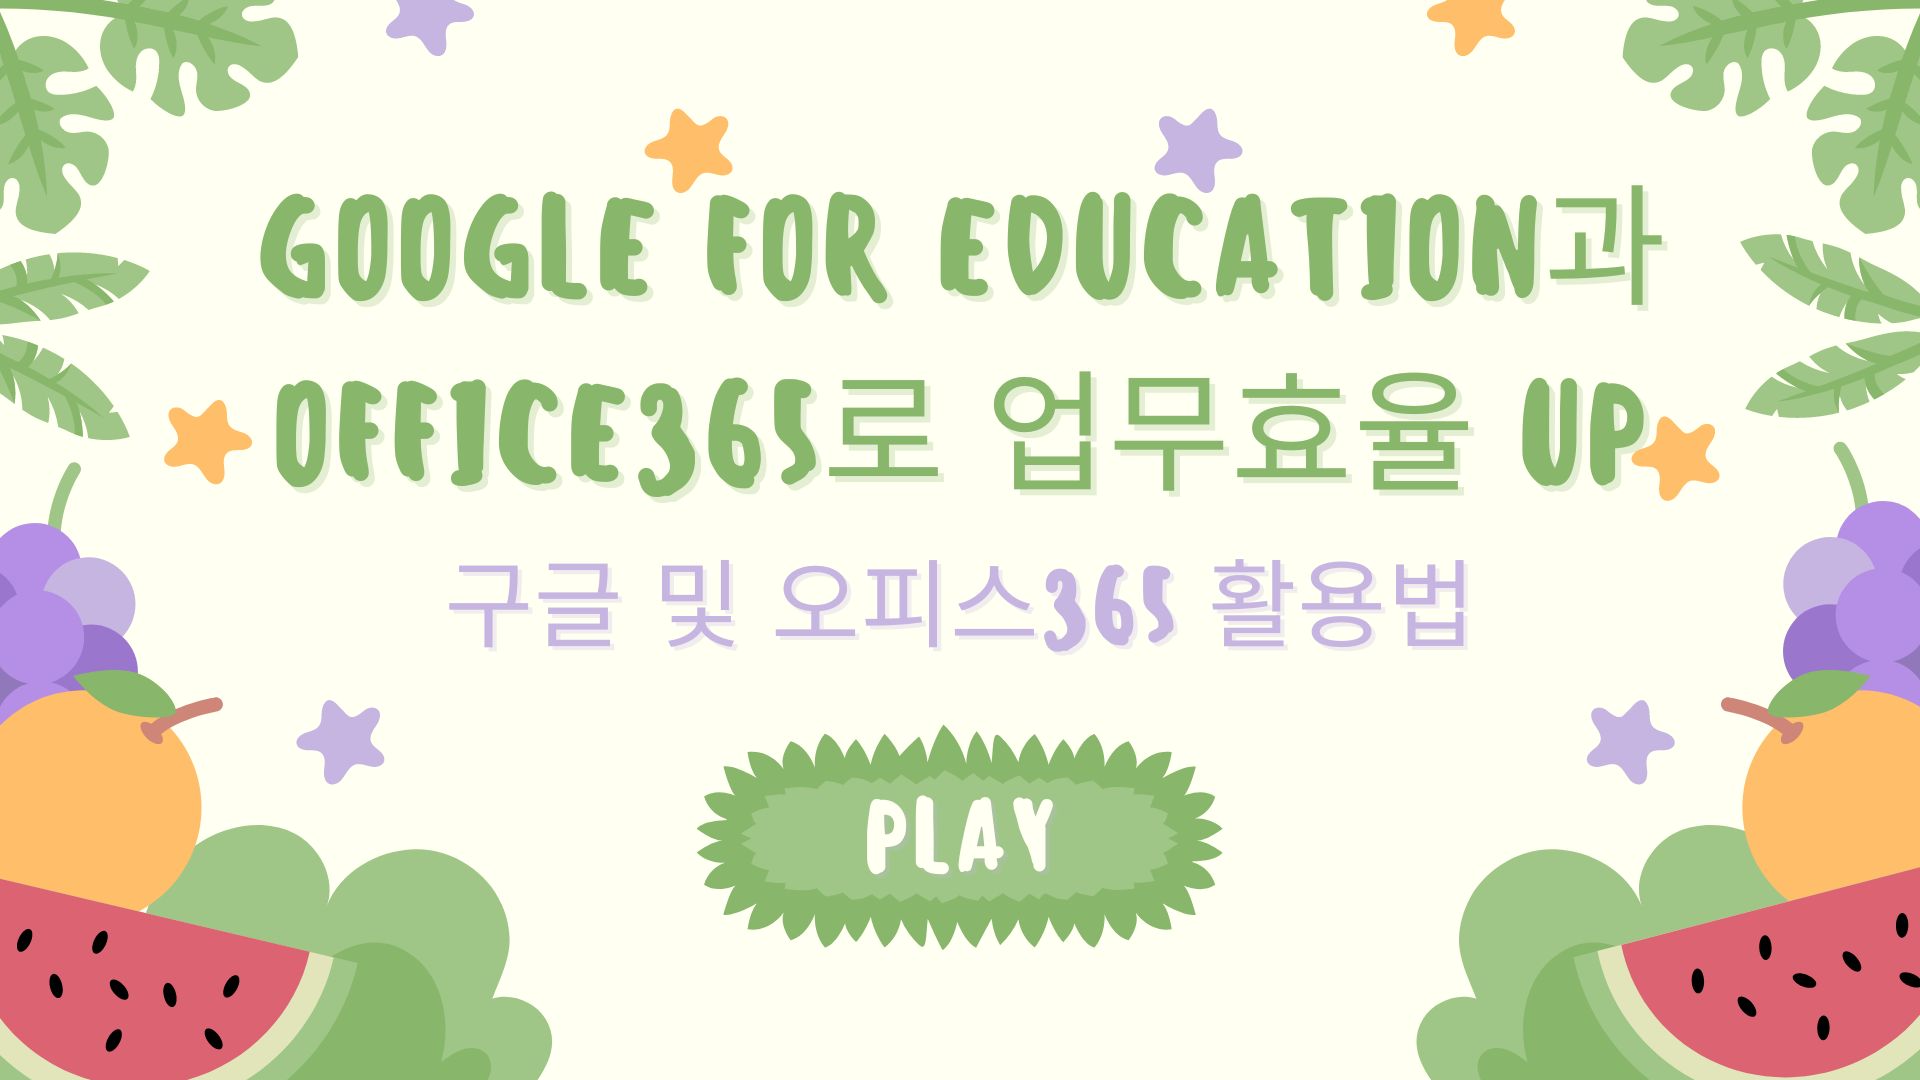 Google for Education과 Office365 로 업무효율 Up